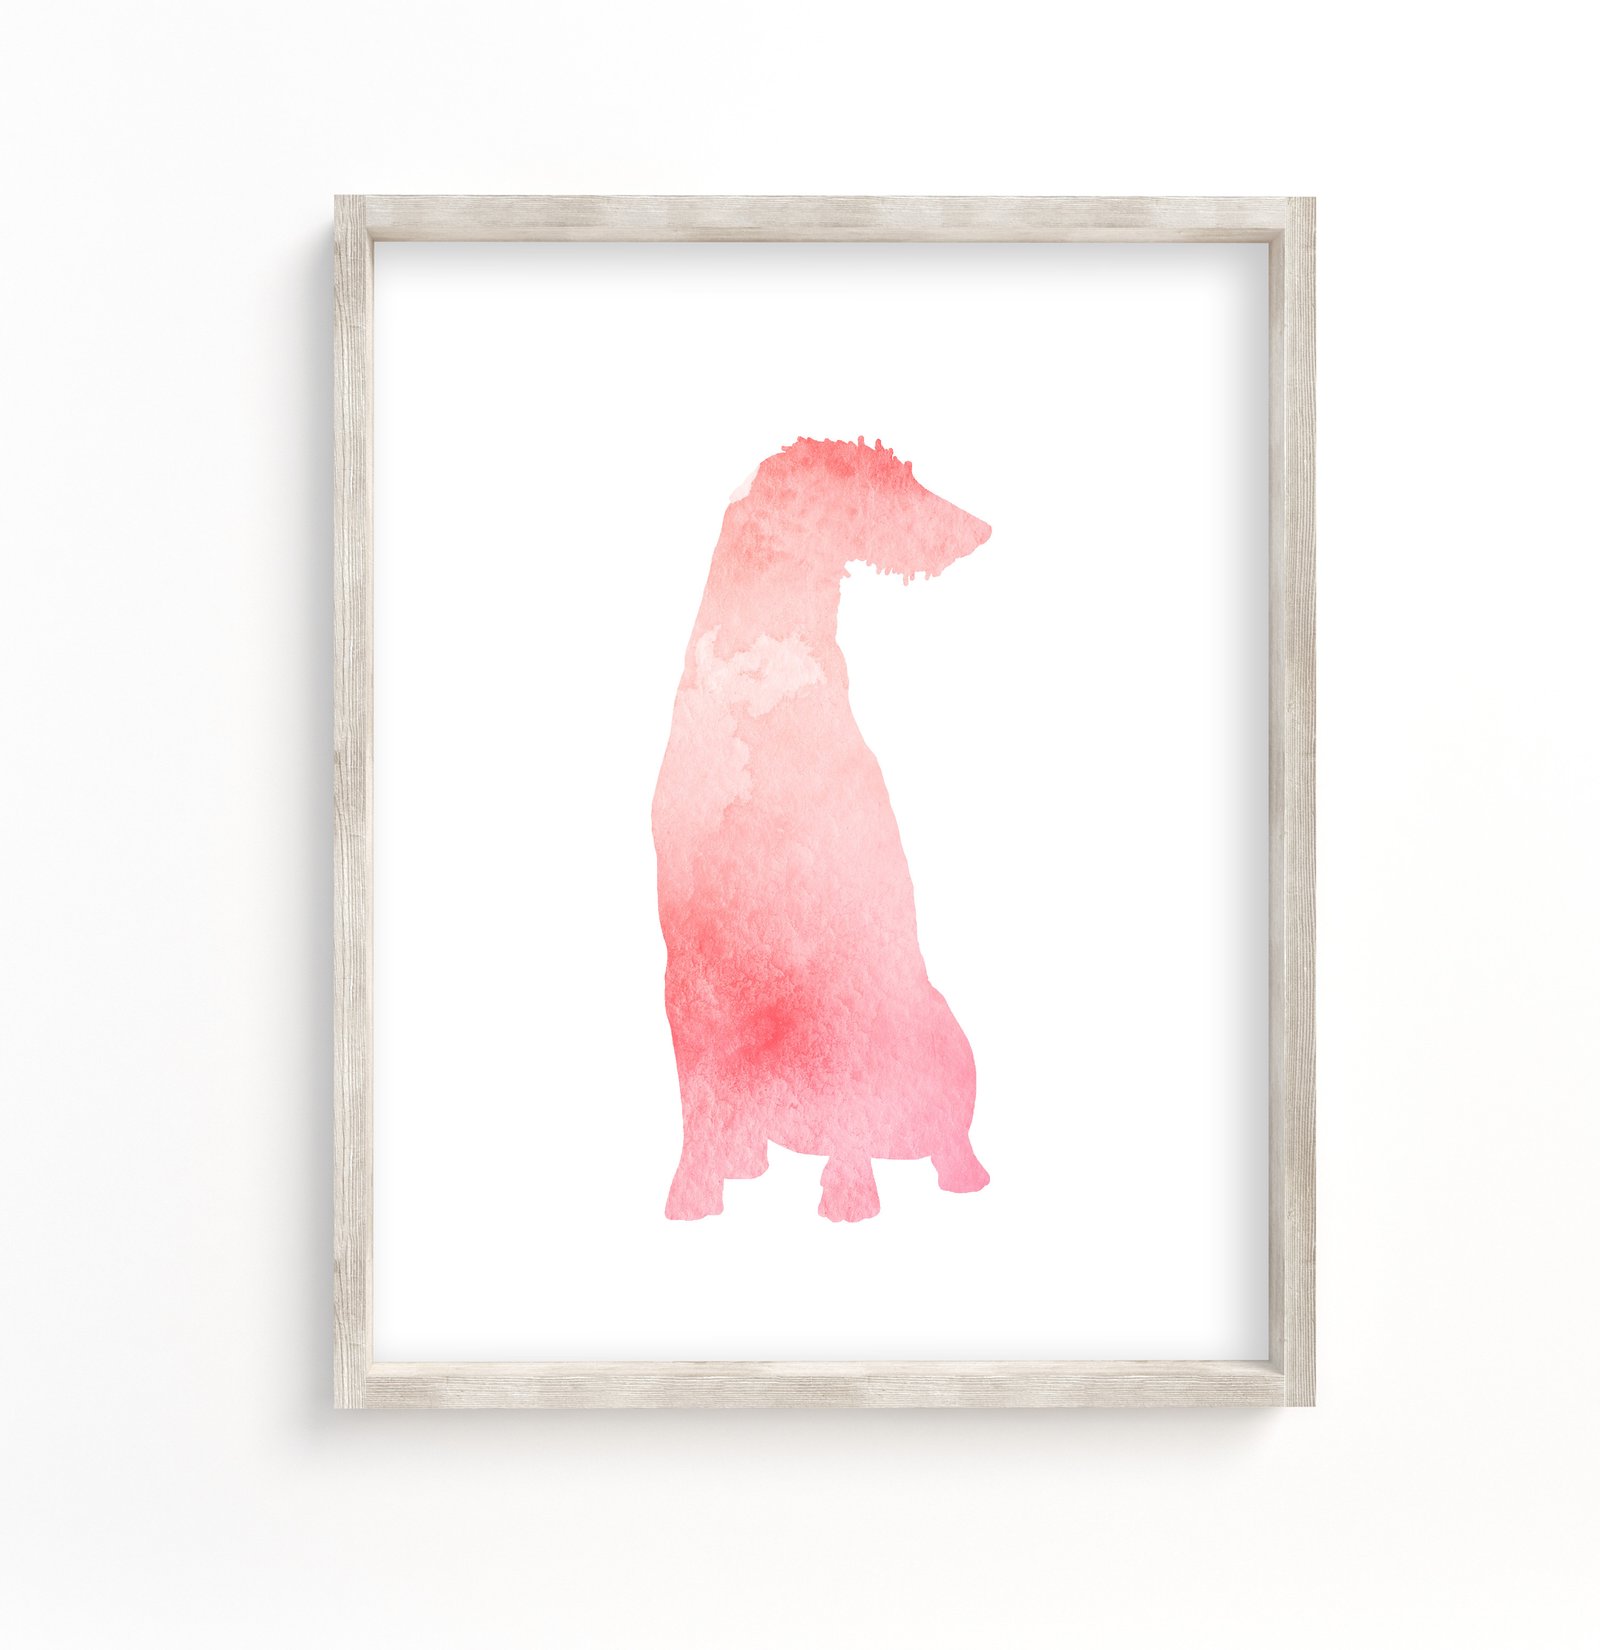 this picture features a pink deerhound silhouette